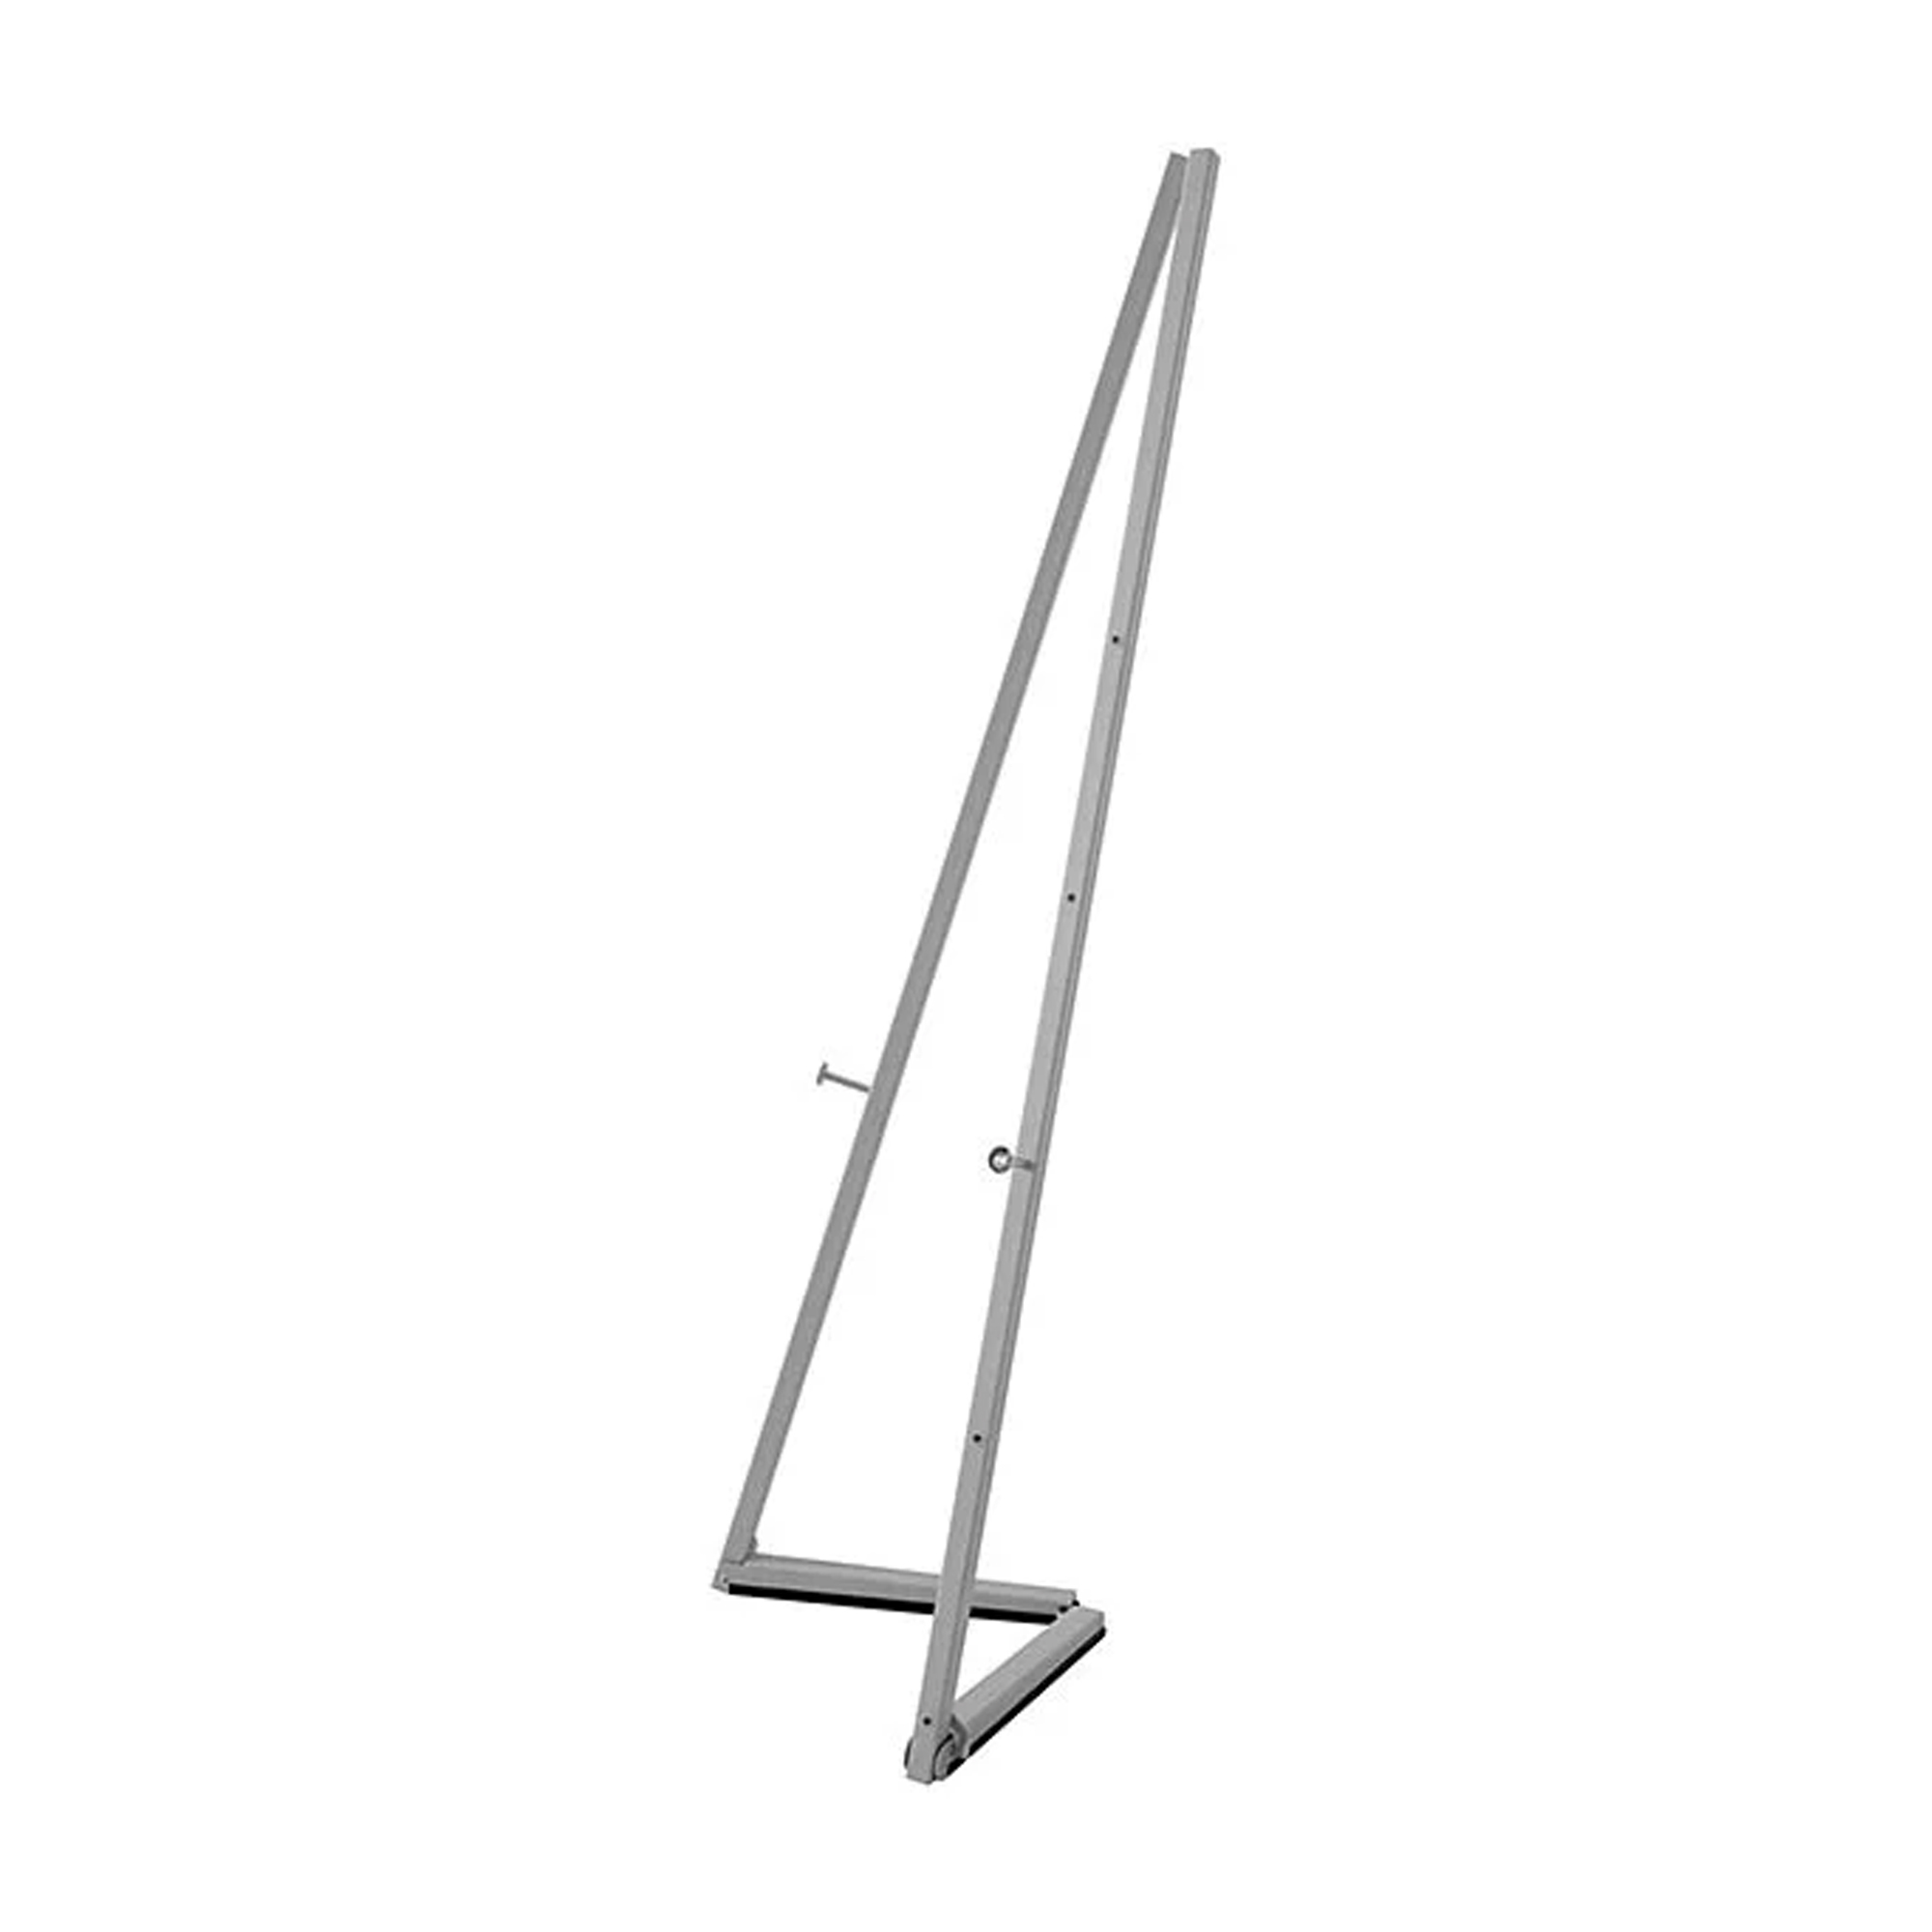 https://www.displaysoutlet.com/wp-content/uploads/2022/06/gray-portable-easel-59-inch-with-5-different-height-adjustments-foldable-and-practical-solution-for-painting-2.jpg